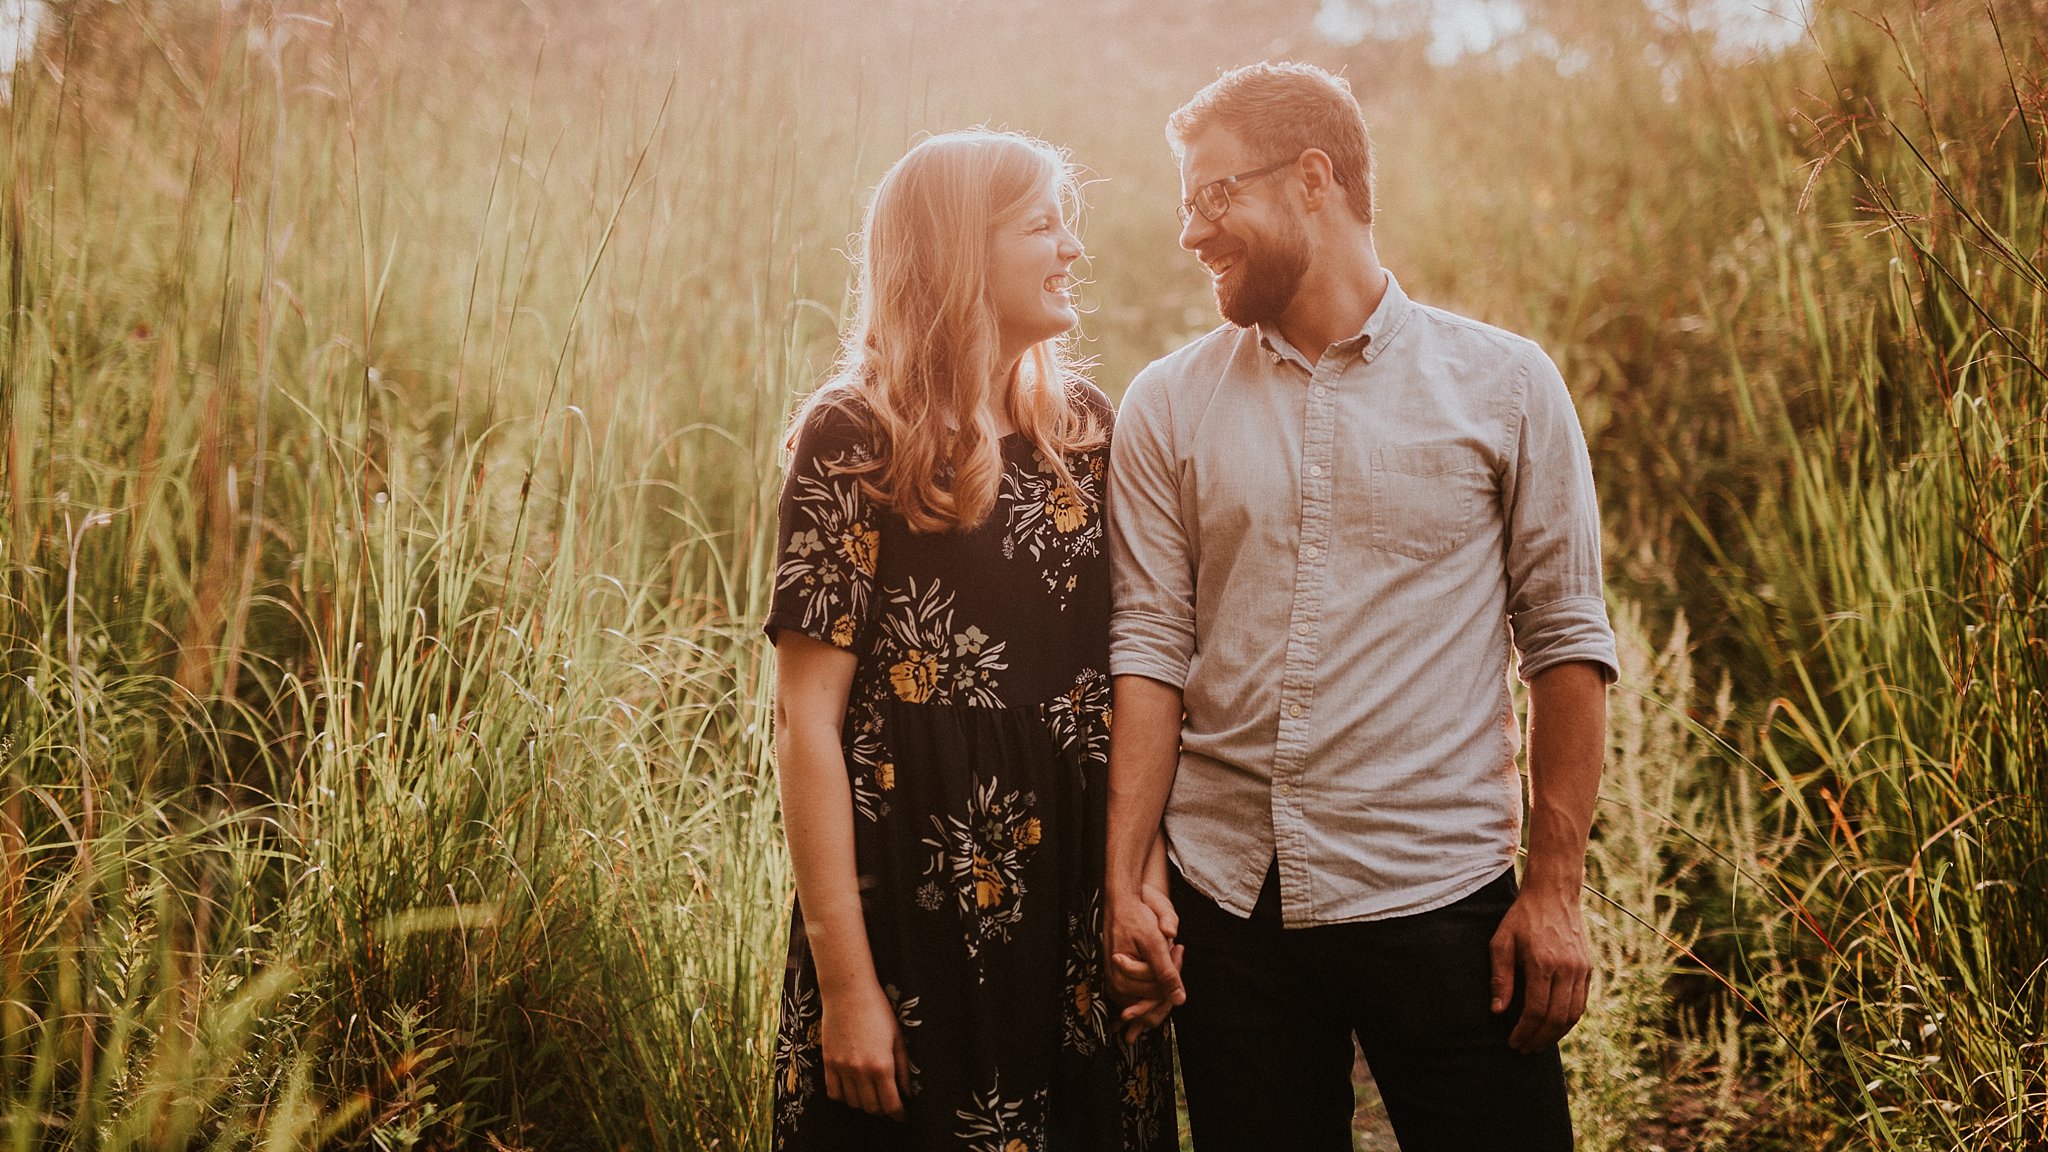 peter-katelyn_chicago-engagement-session_west-dundee-raceway-woods_0006.jpg